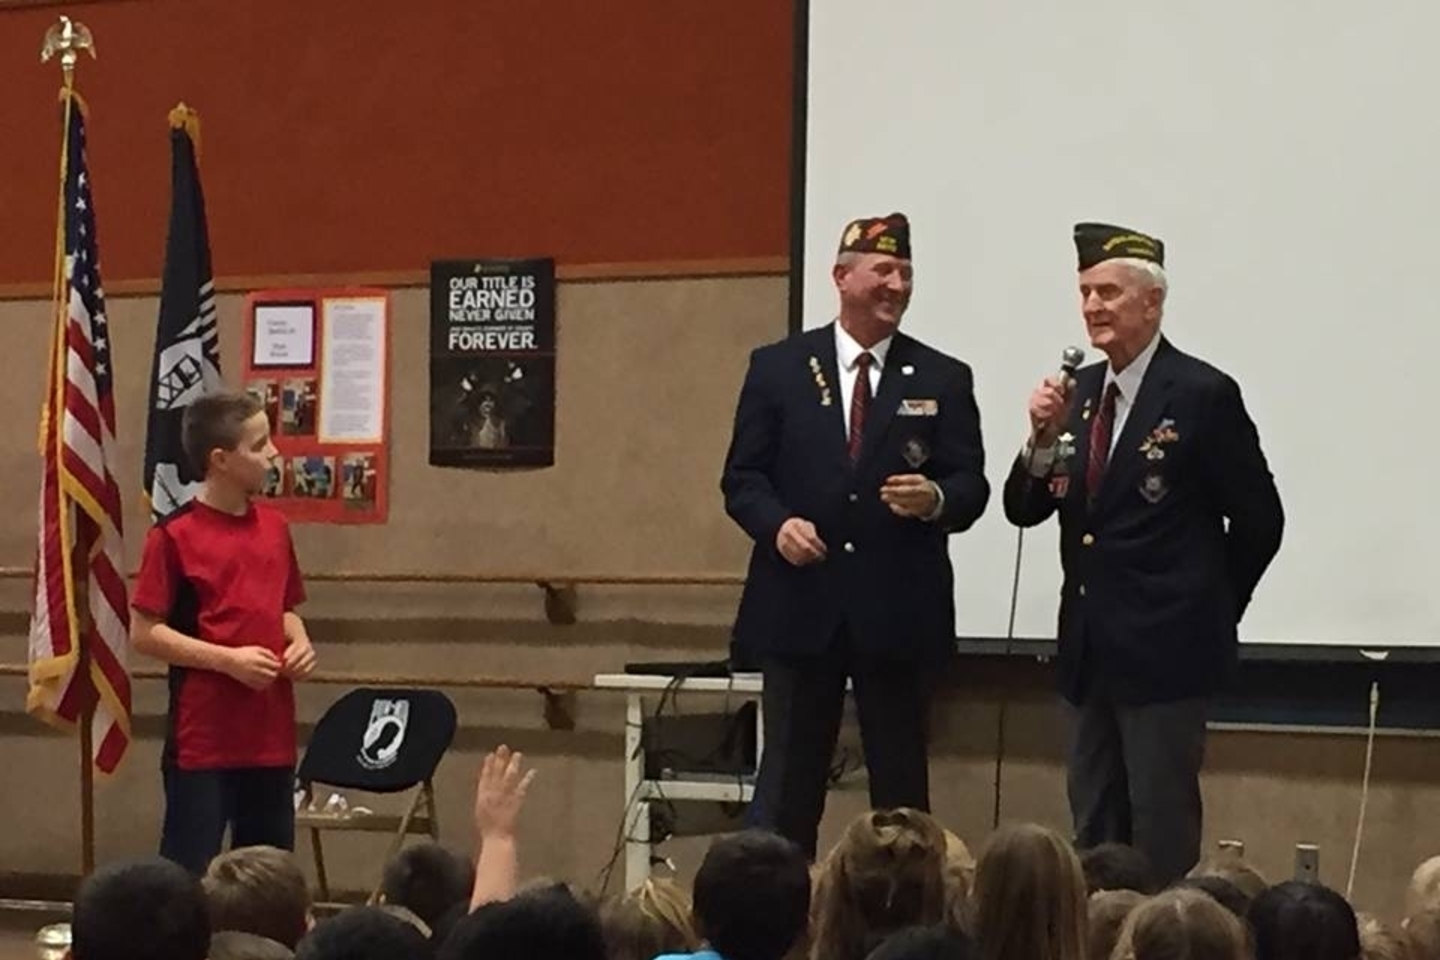 Jeff Knight and Jason Griswold at MES Veterans Day Assembly